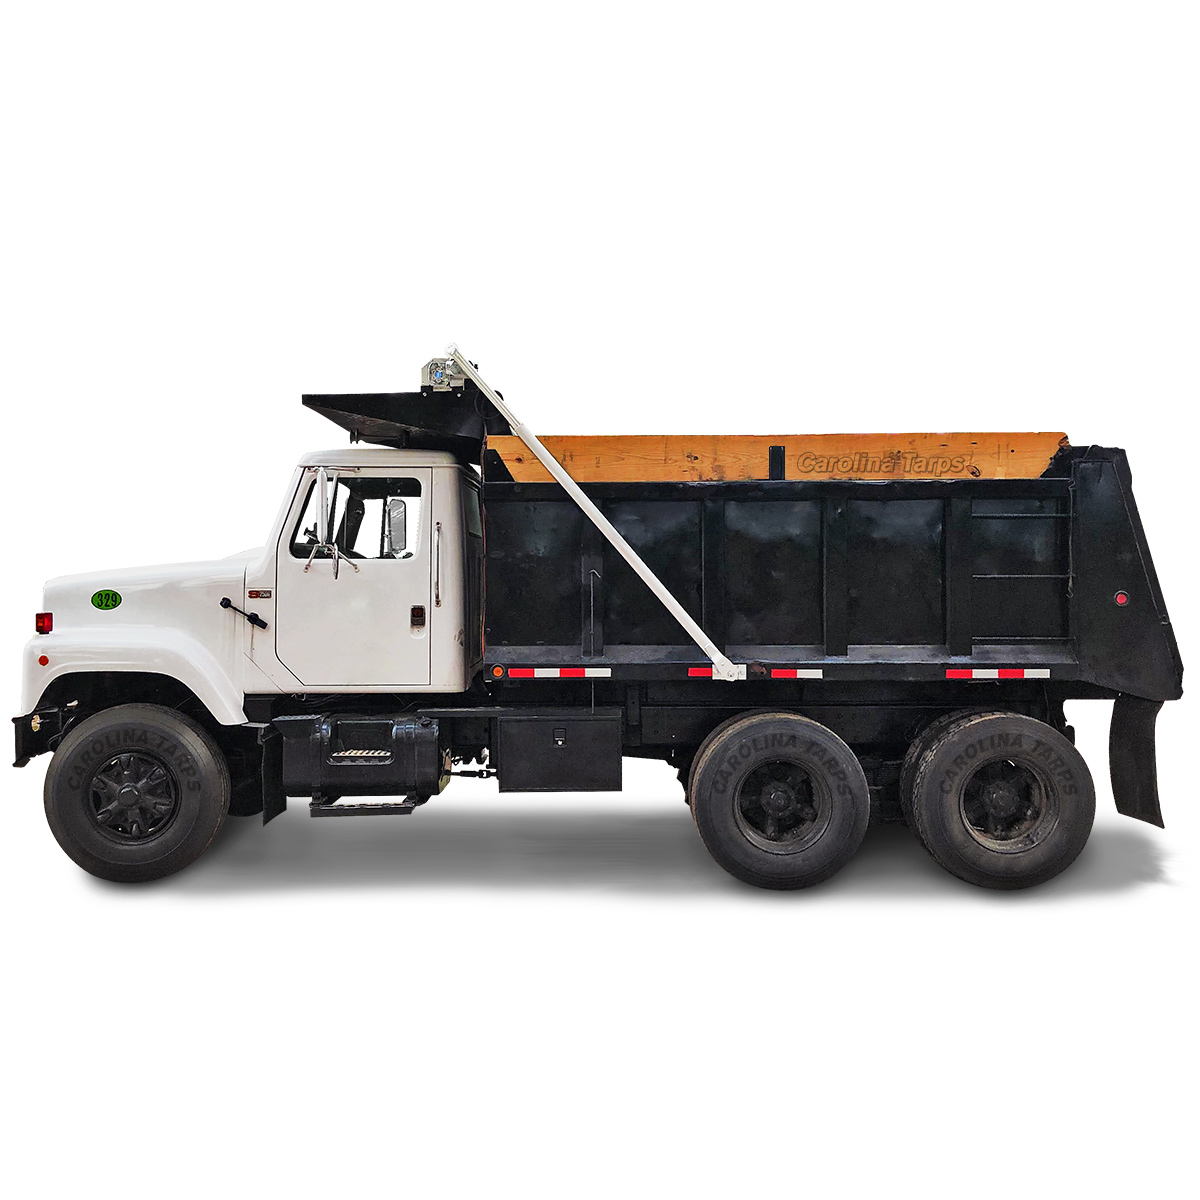 Dump Truck Tarp System | Electric 4-Spring Aluminum Tarp Kit | Fits up to 24' Long and 95 Wide